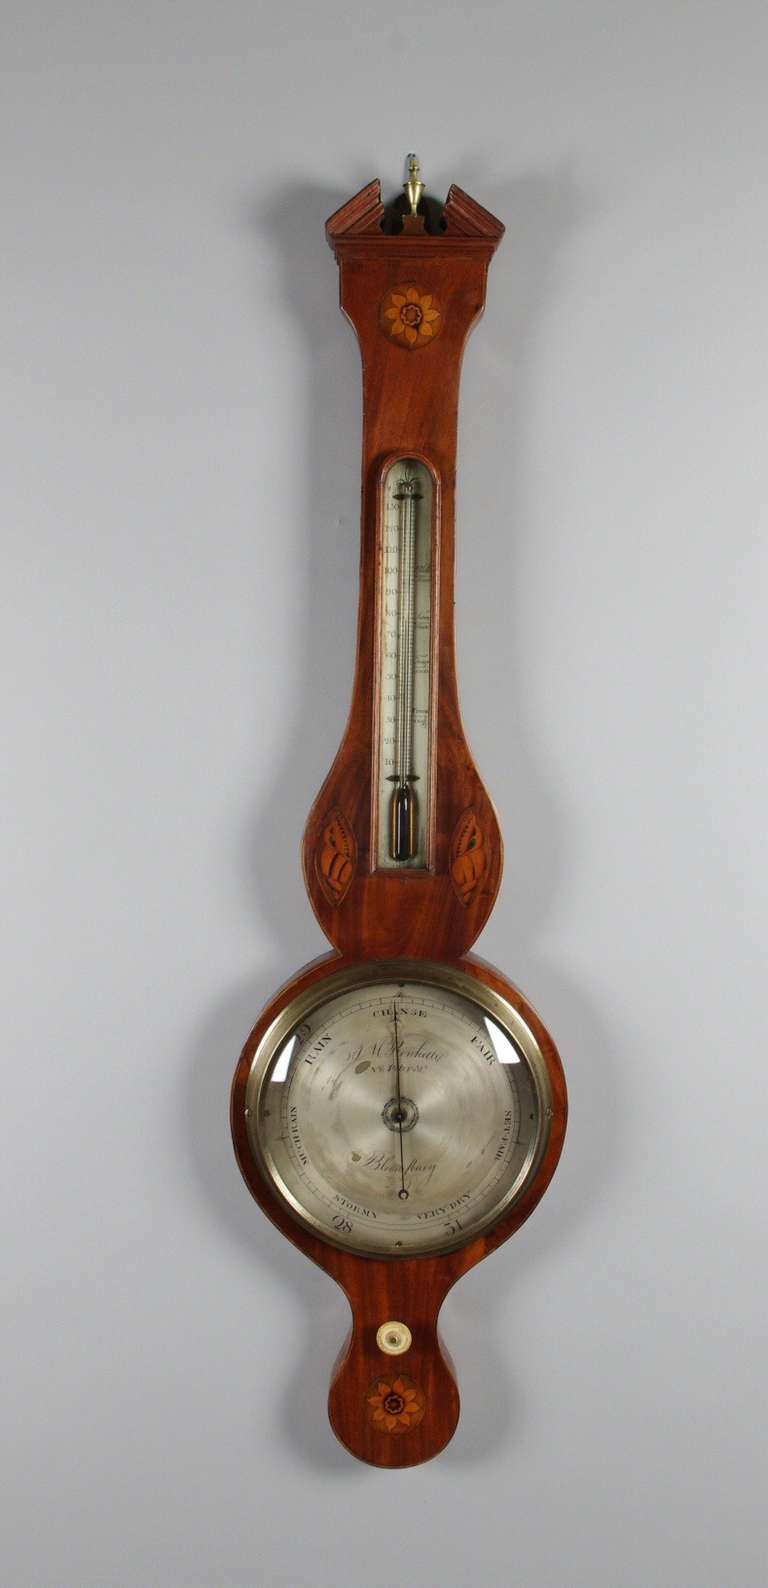 George III mahogany wheel barometer, the broken pediment with a replaced brass finial; the inlaid flower over the thermometer, flanked by inlaid shells; the engraved face with replaced convex glass over the bone set-dial over another inlaid flower.